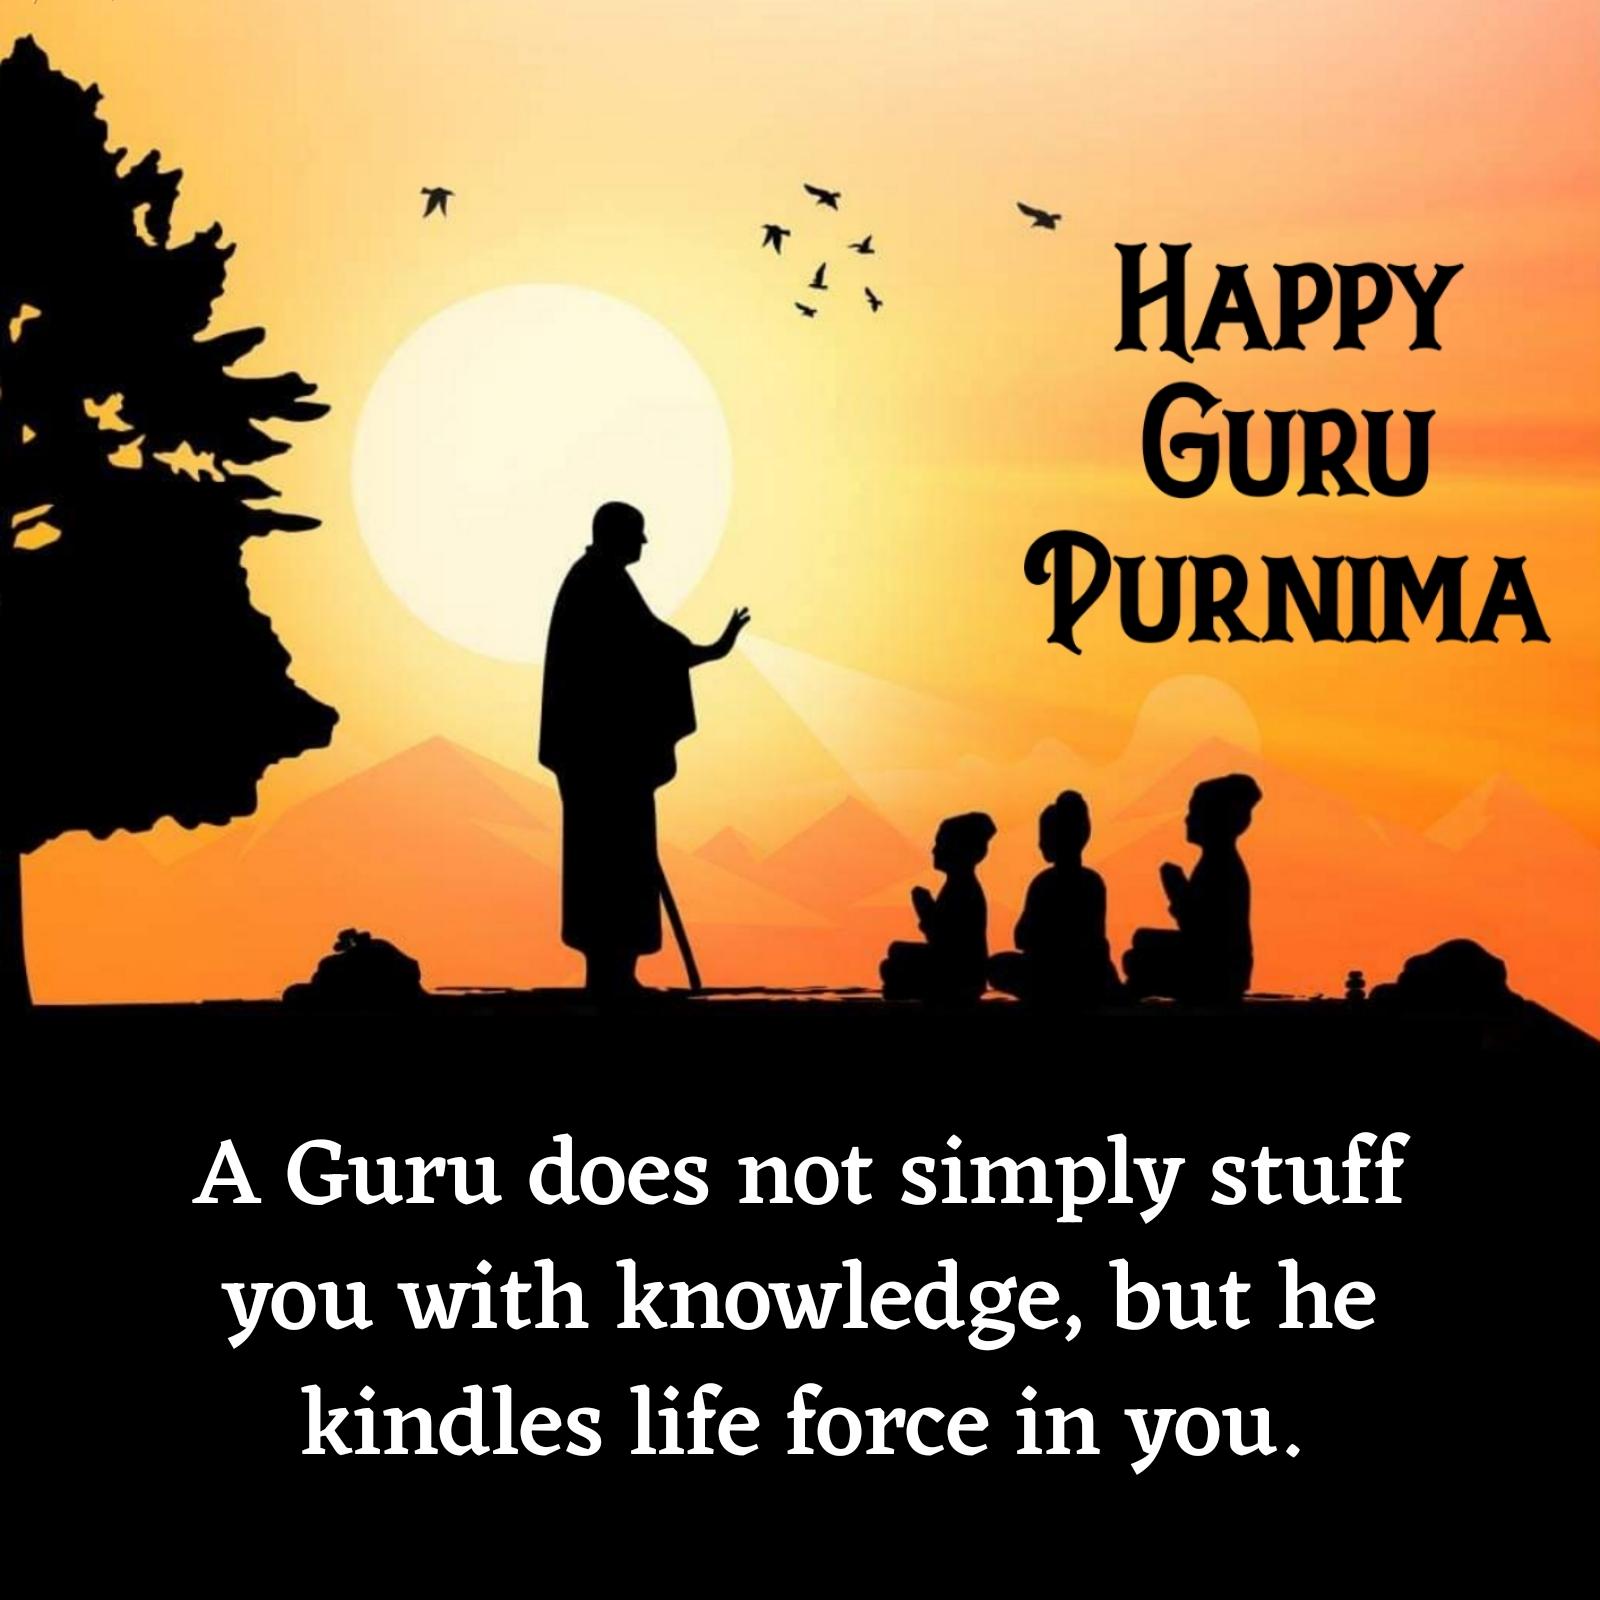 A Guru does not simply stuff you with knowledge but he kindles life force in you